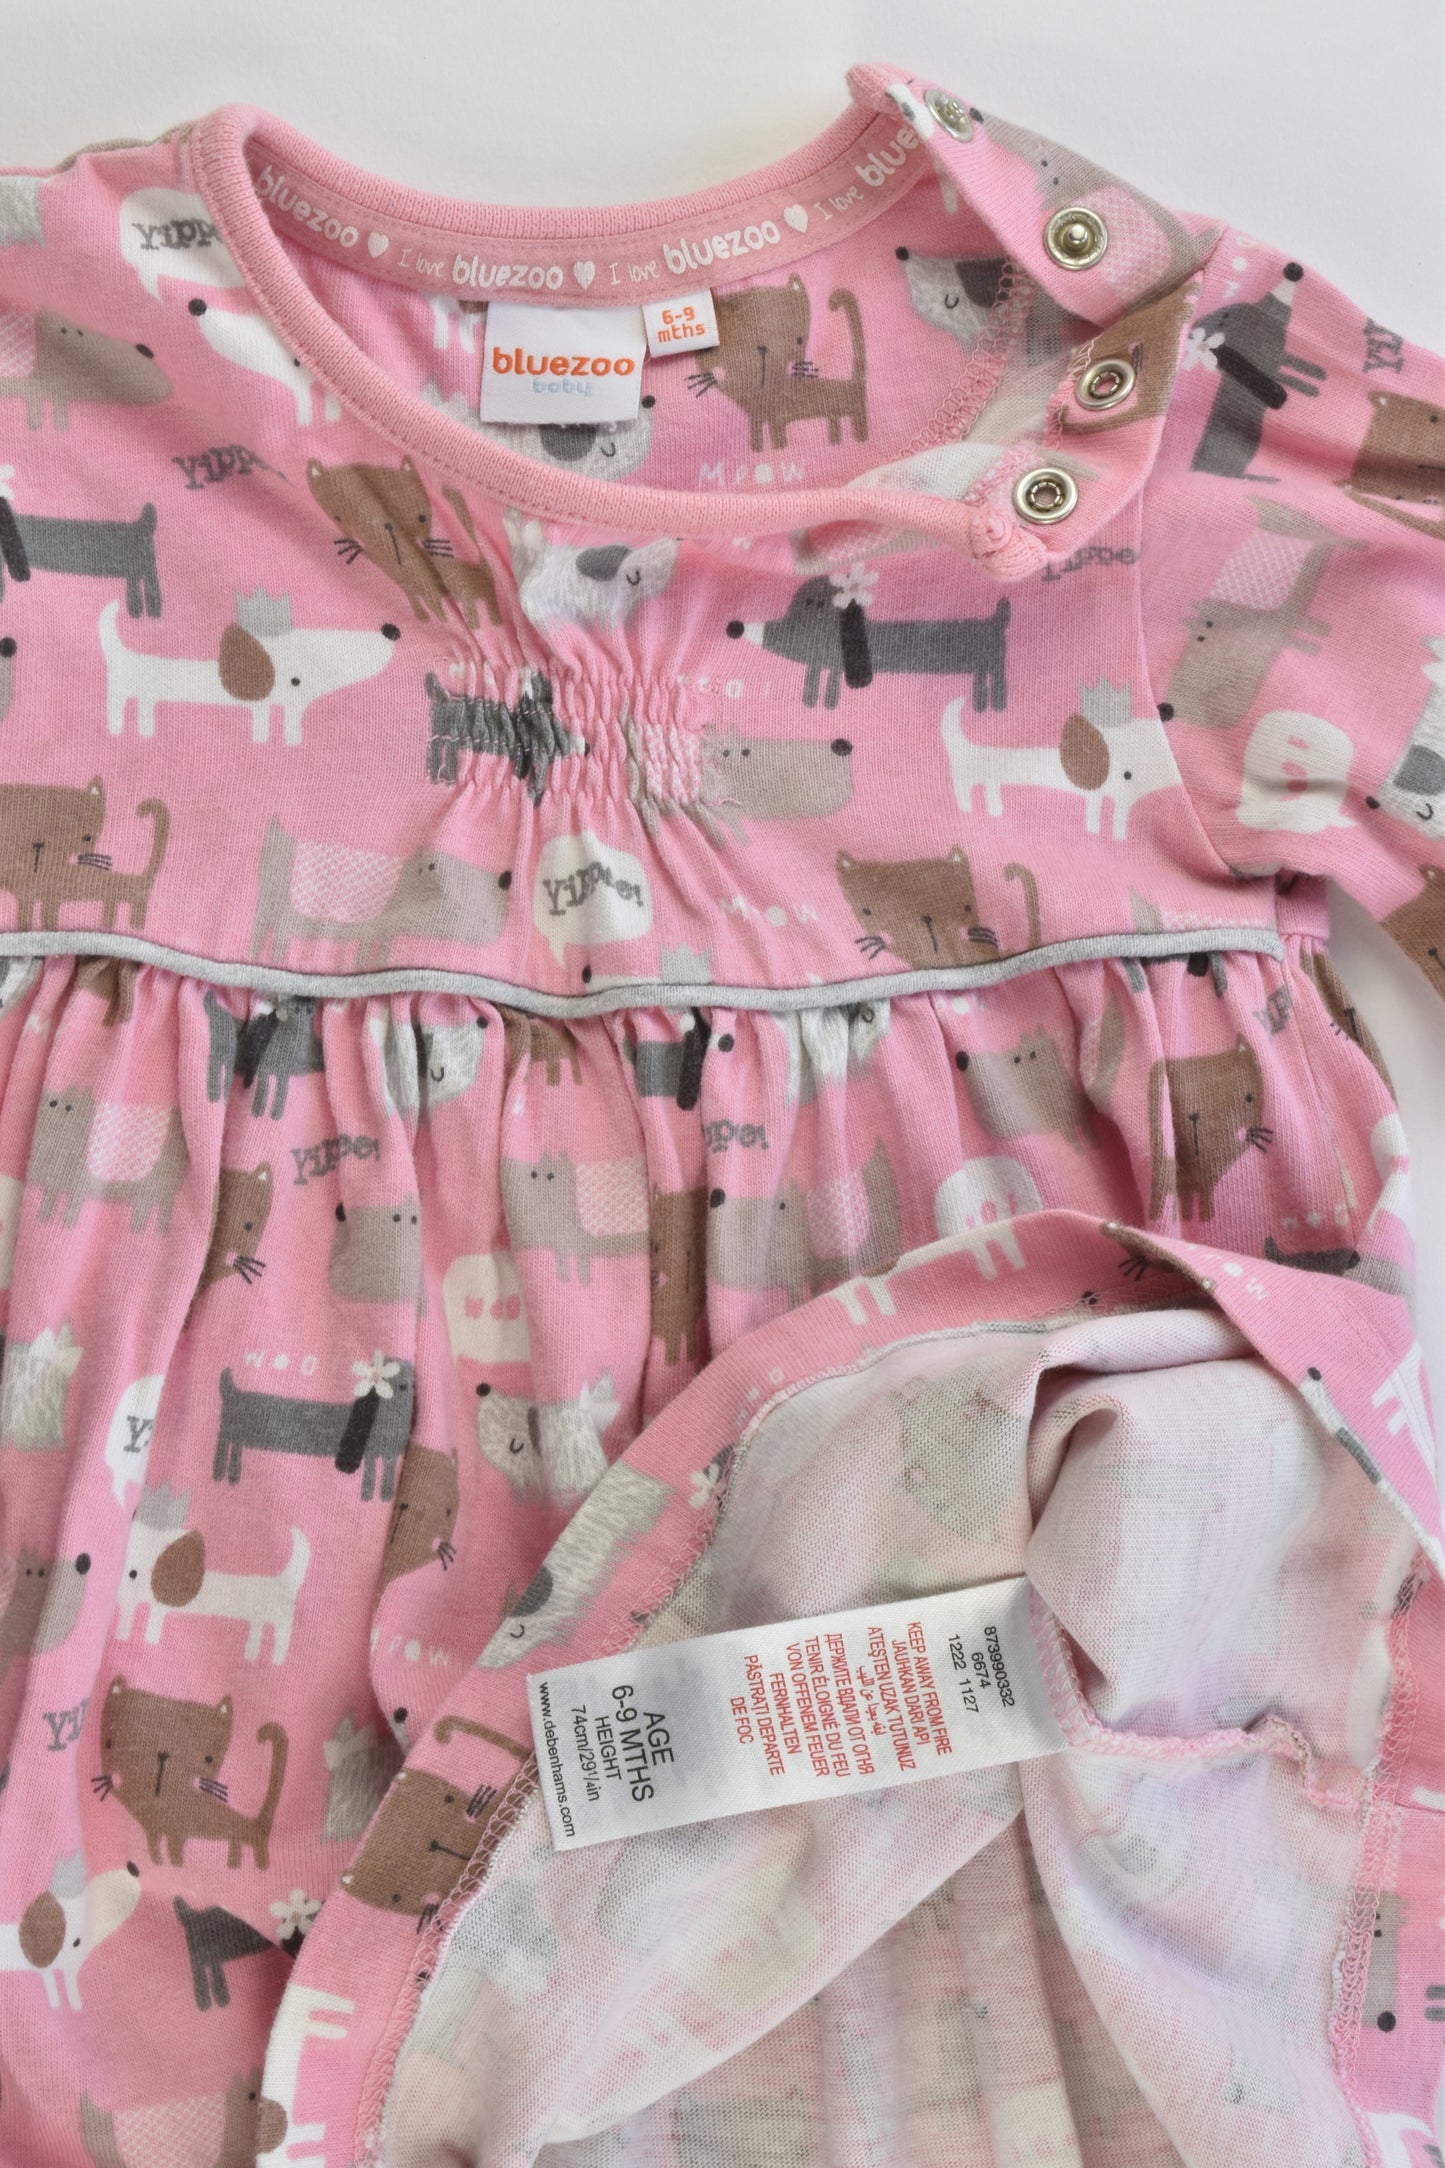 Bluezoo (Debenhams) Size 0 (74 cm, 6-9 months) Cats and Dogs Dress